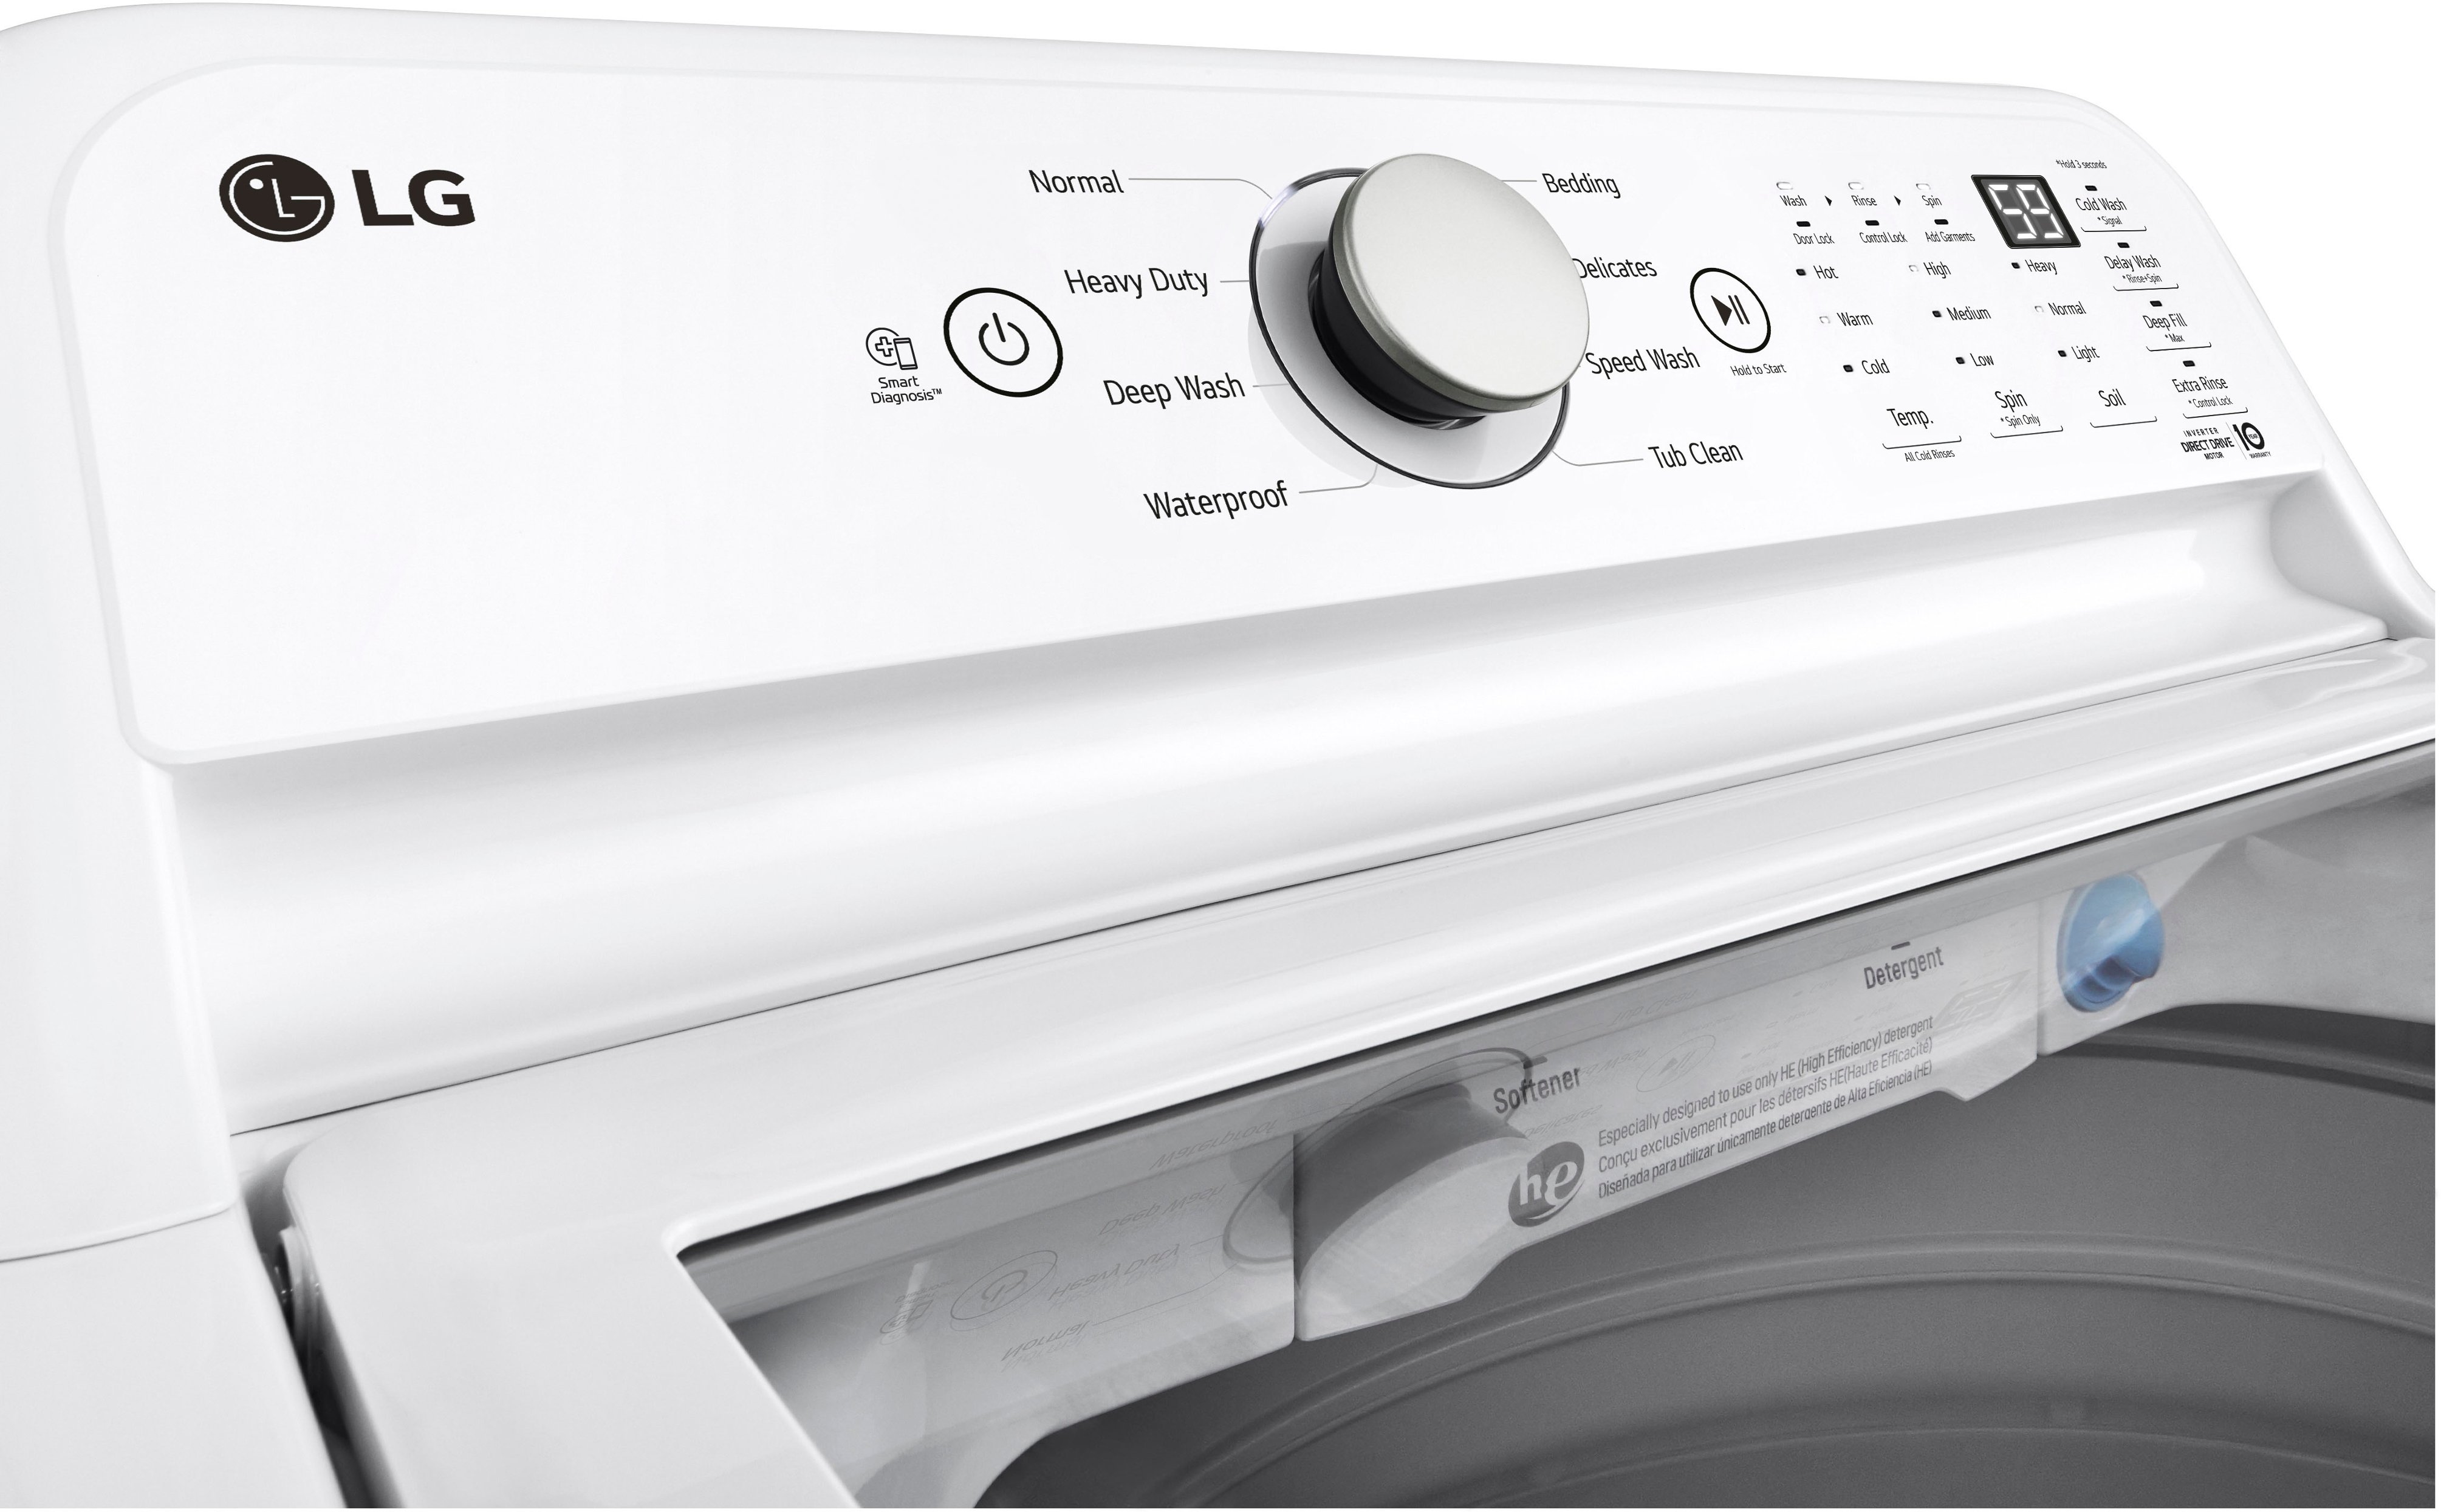 WT7155CW by LG - 4.8 cu. ft. Mega Capacity Top Load Washer with 4